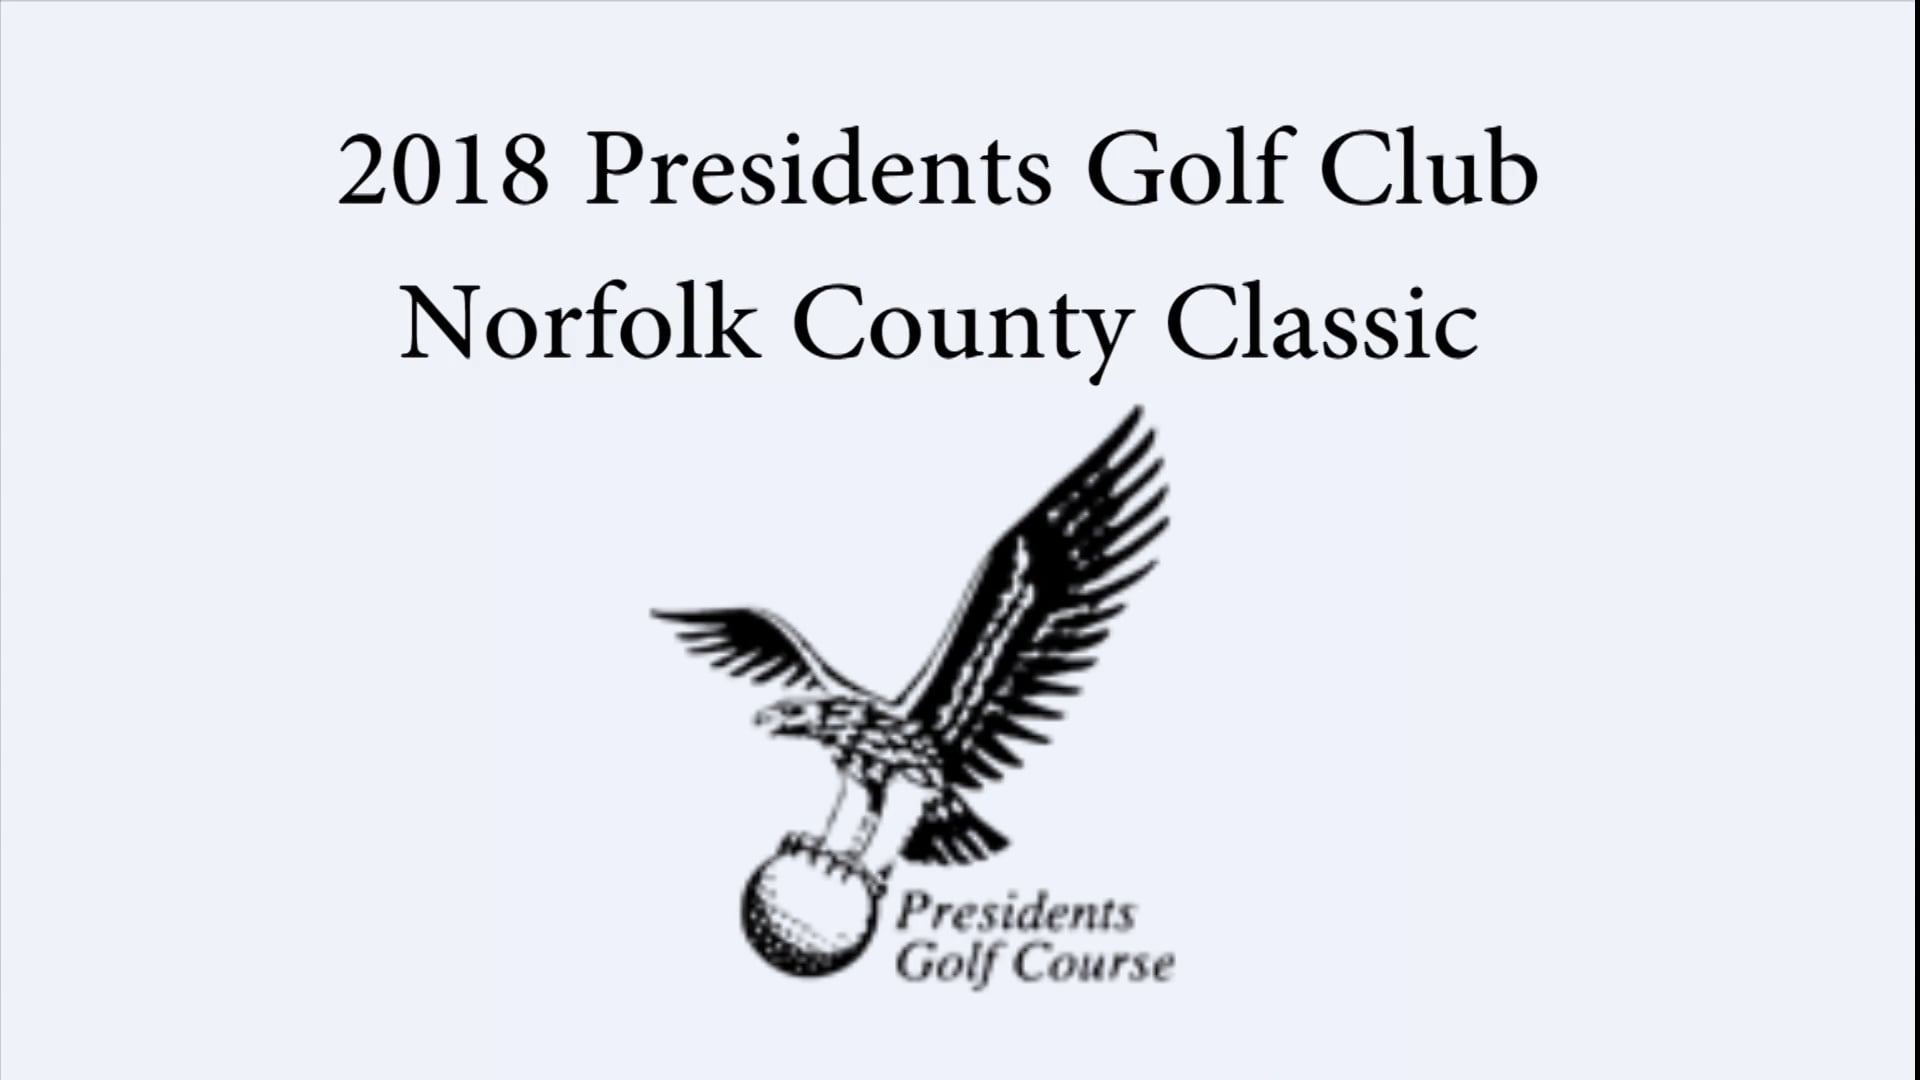 Norfolk County Classic at Presidents Golf Club on Vimeo